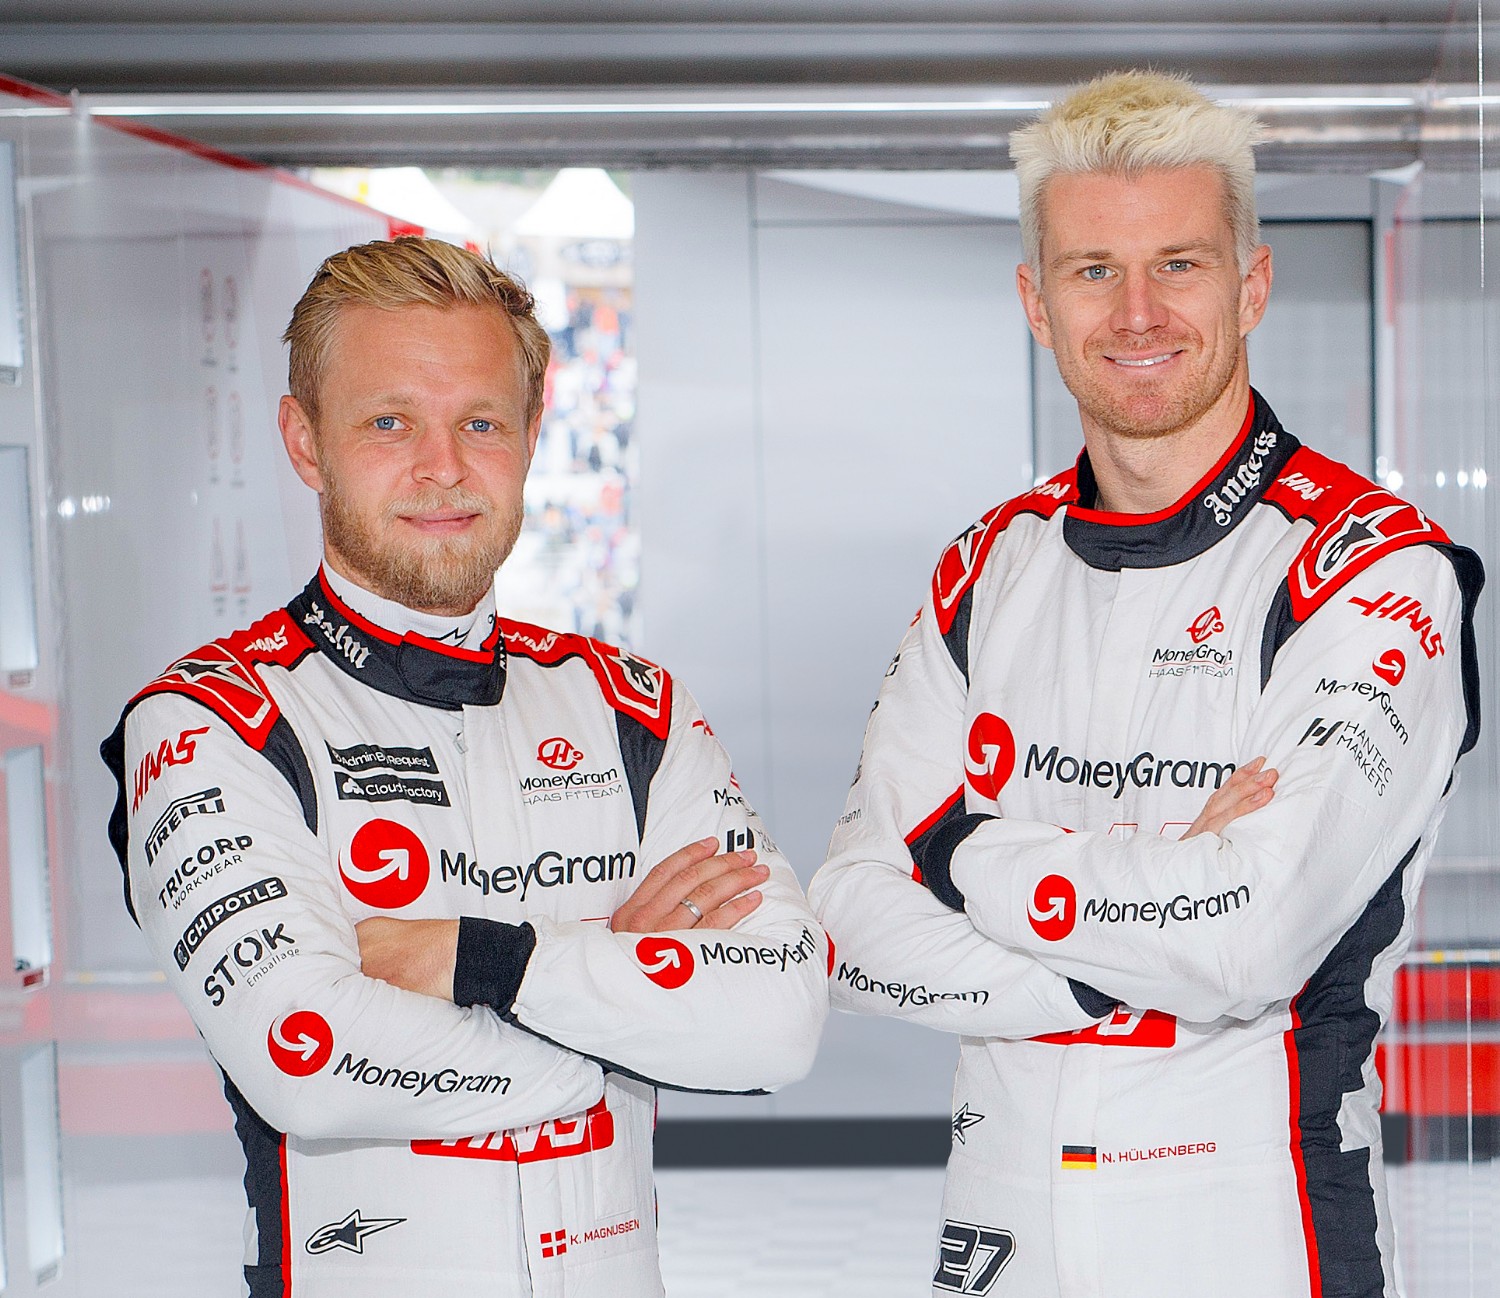 The Moneygram Haas F1 team has re-signed Kevin Magnussen (L) and Nico Hulkenberg (R)